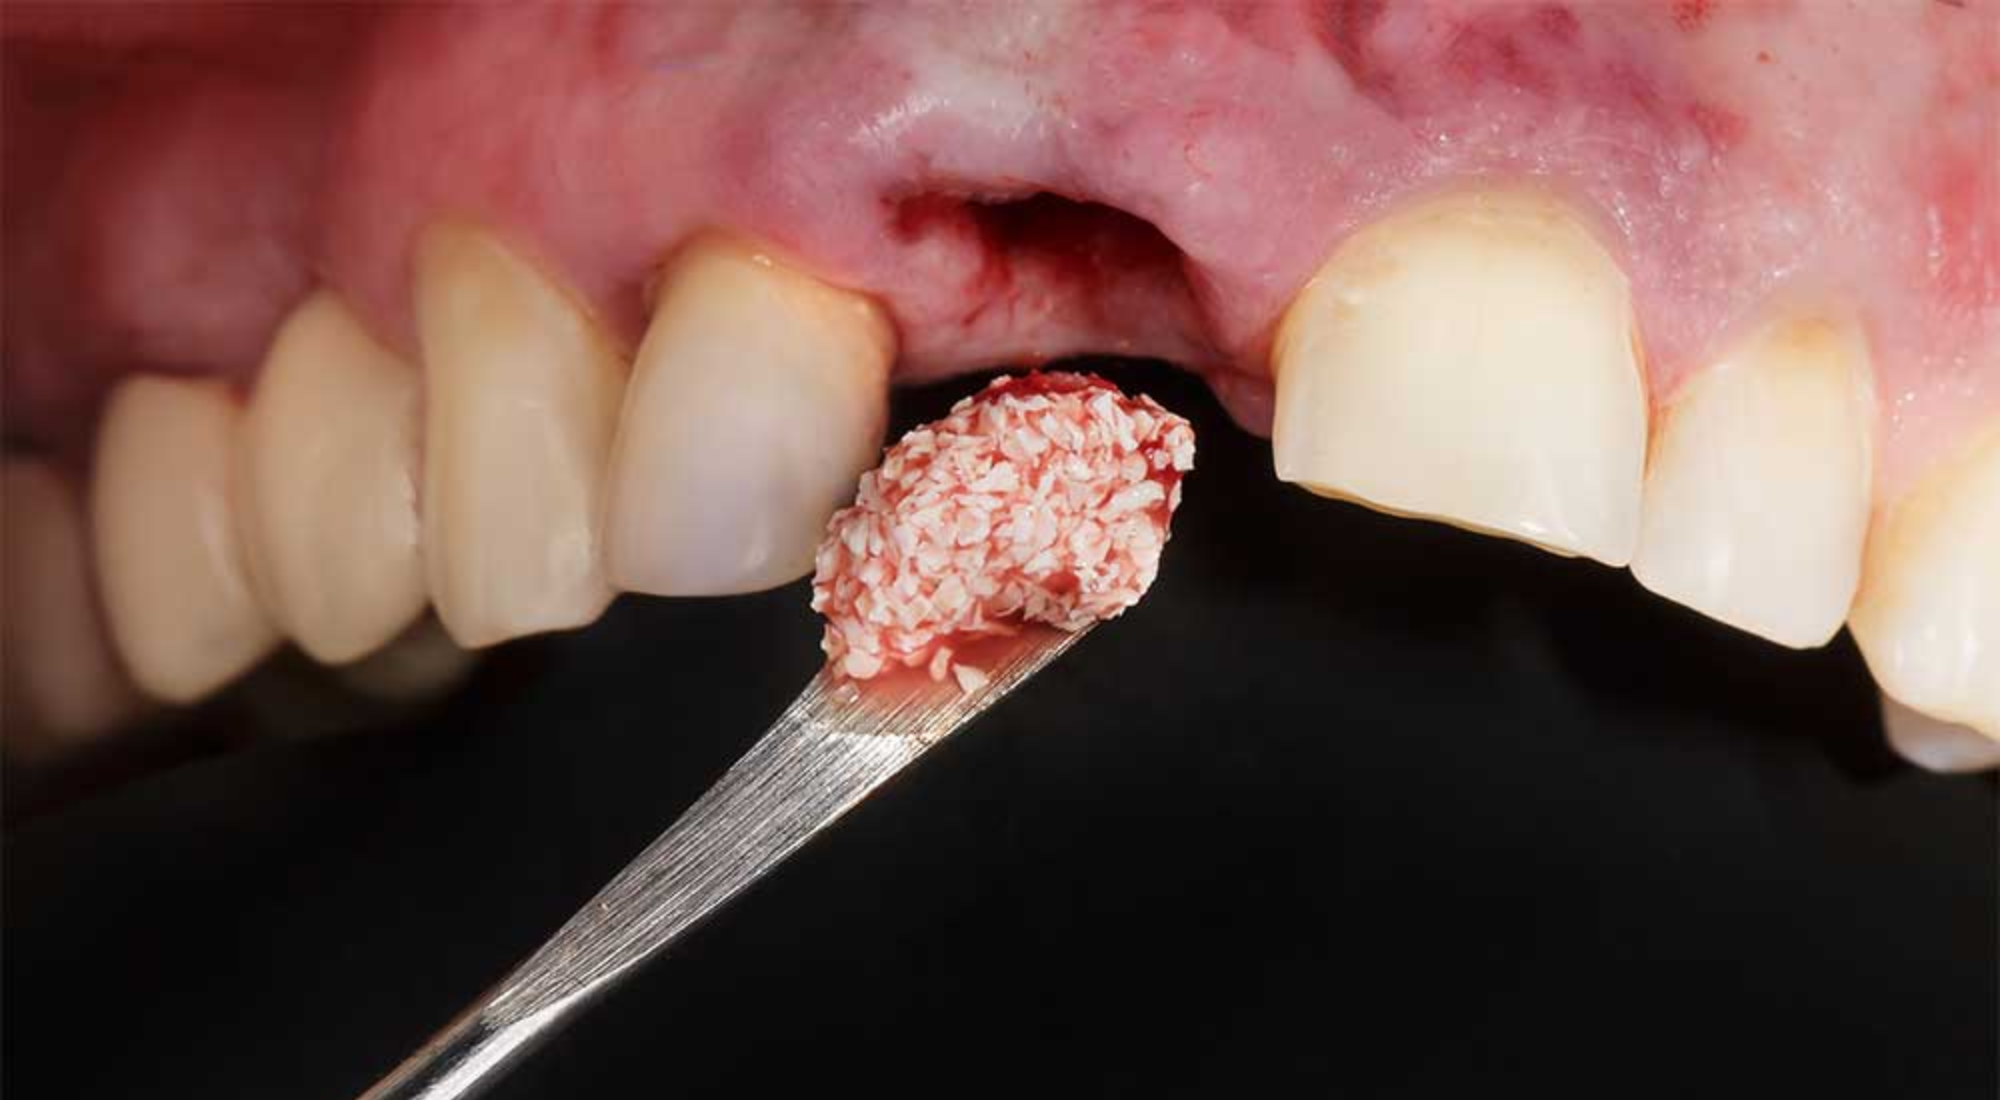 recovery after bone grafting